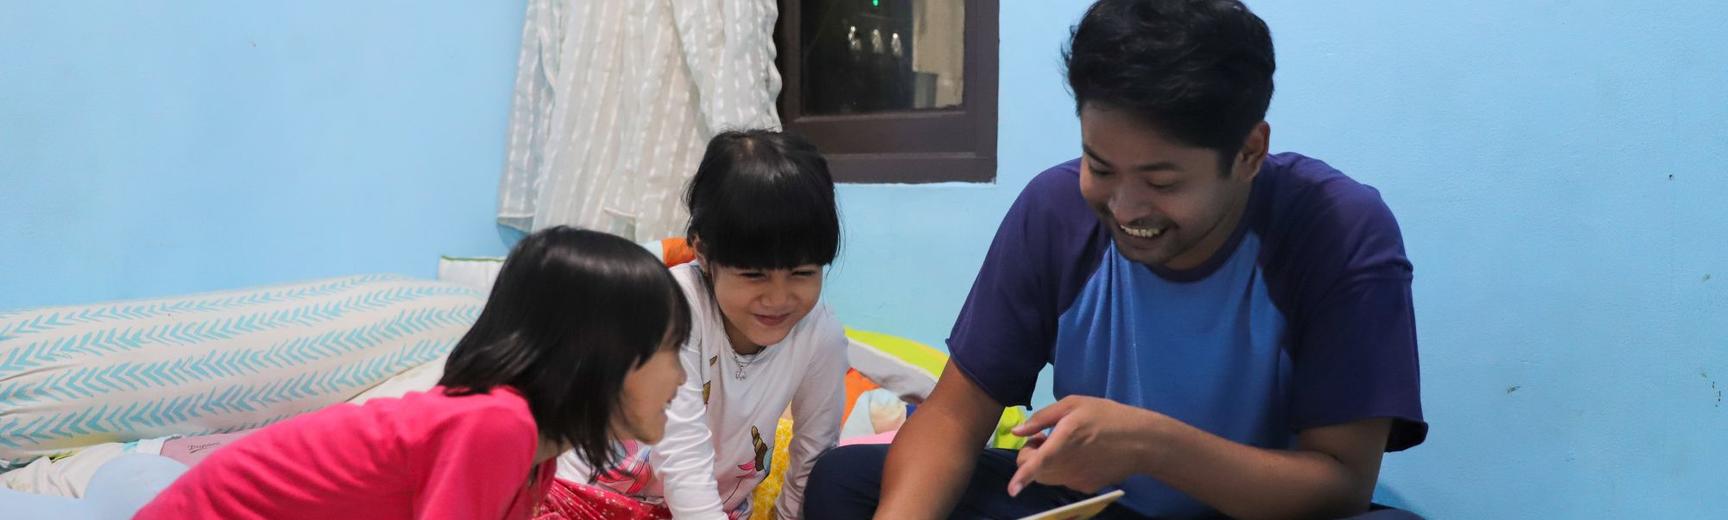 parenting within the preschool system in malaysia unicef